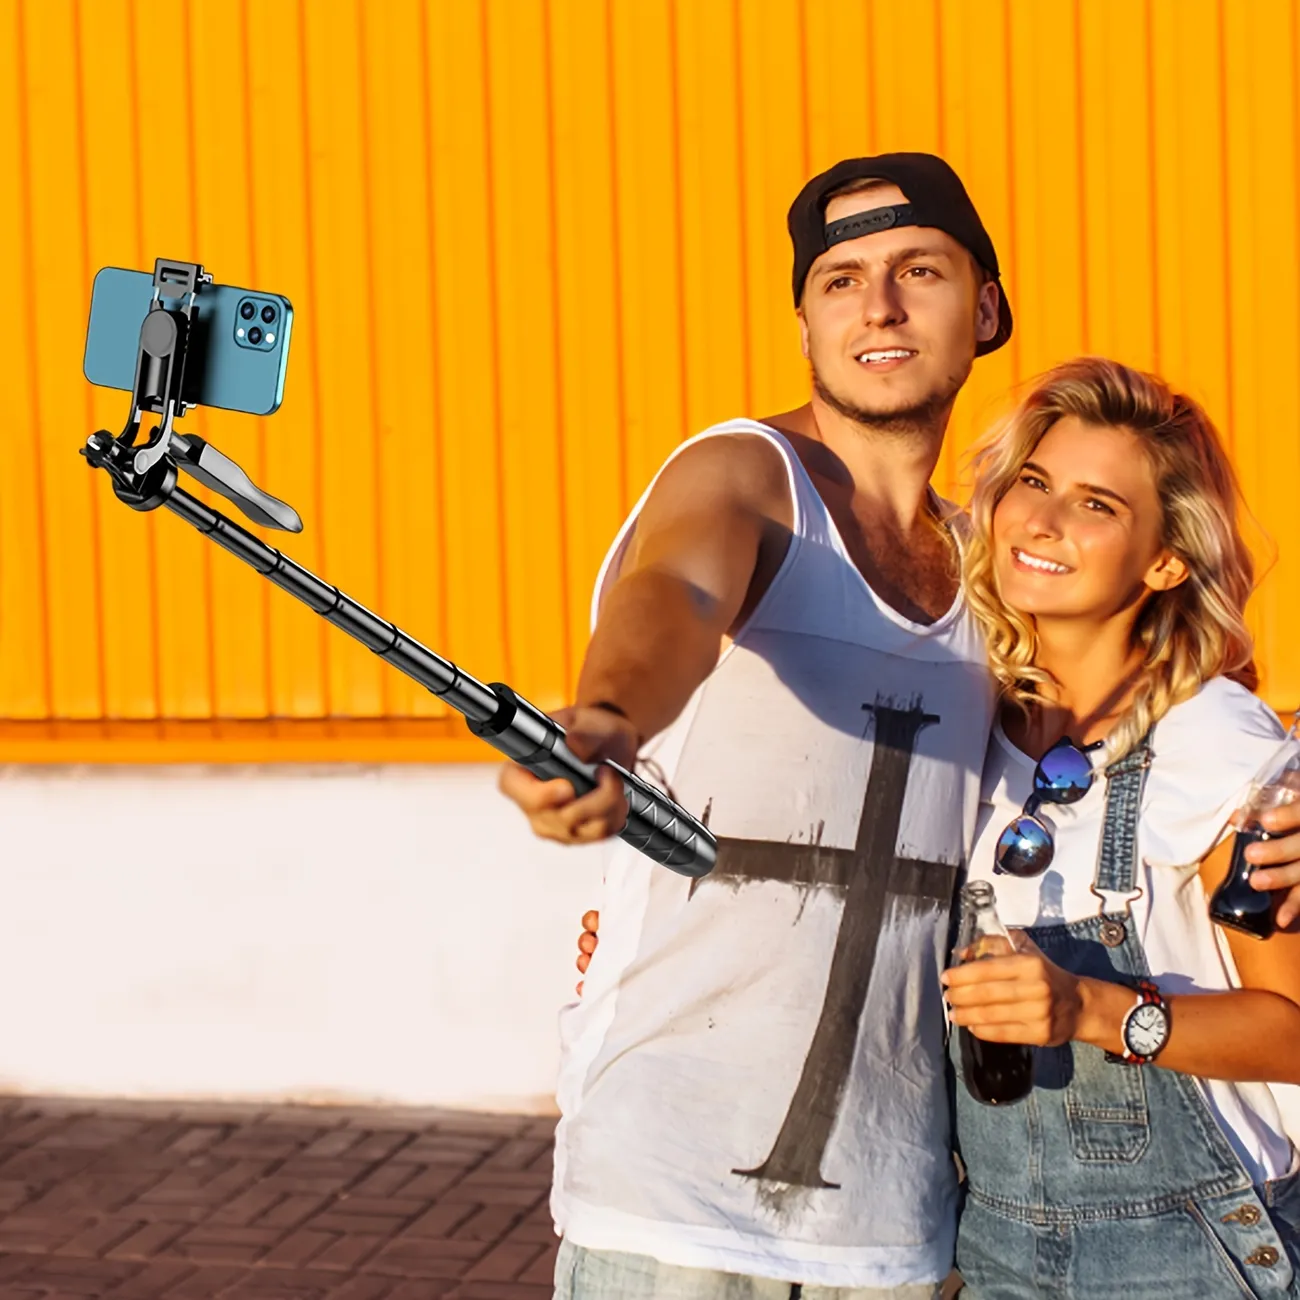 Selfie Stick Tripod, All In One Extendable Phone Tripod Stand With Wireless Remote 360° Rotation For Iphone And Android Phone Selfies, Video Recording, Vlogging, Live Streaming, Aluminum,black